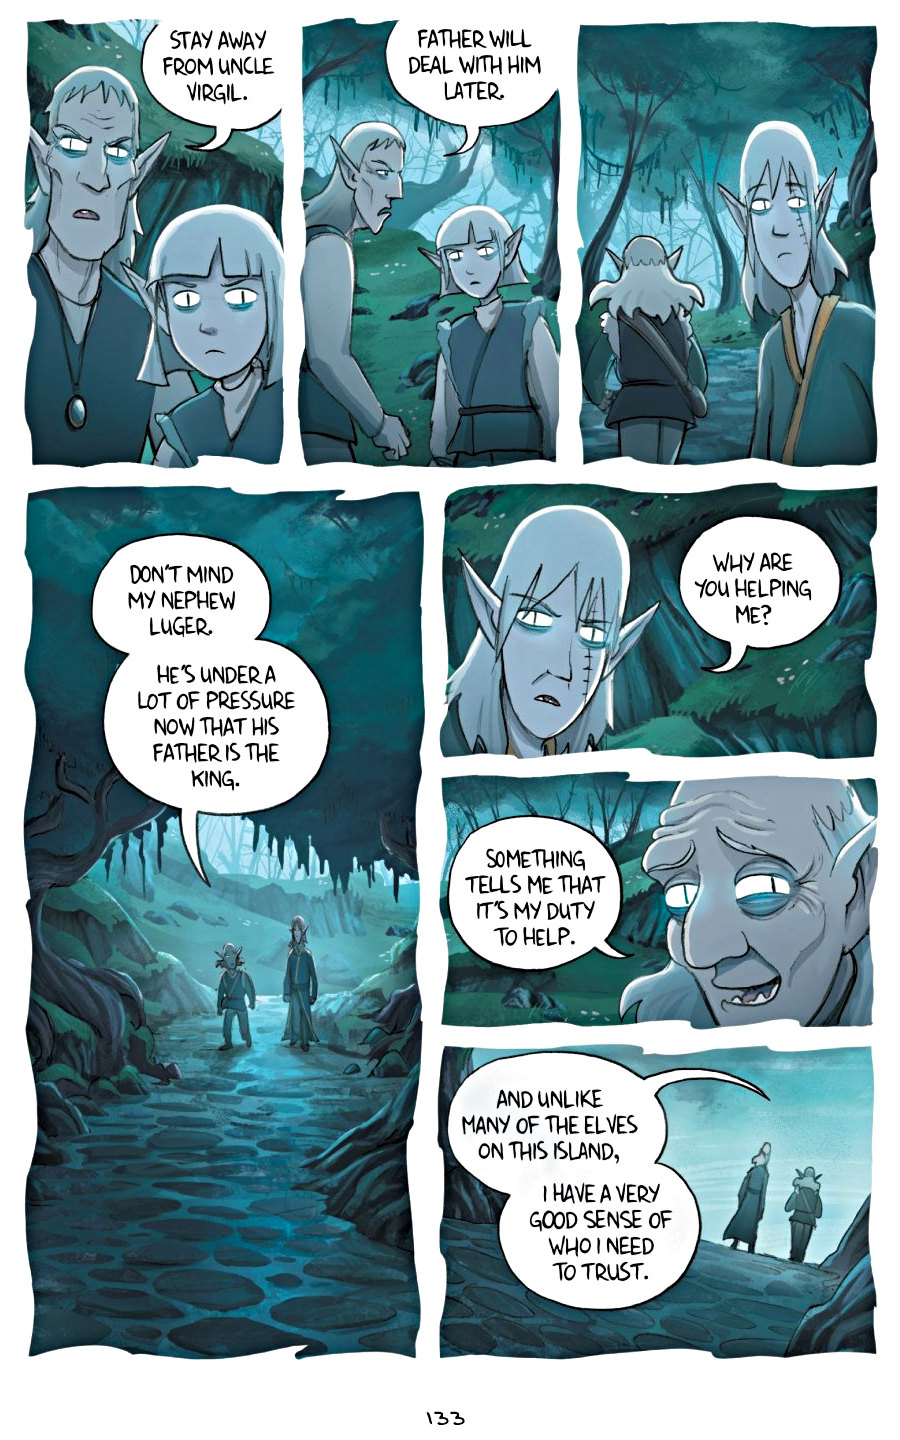 page 133 of amulet 5 prince of the elves graphic novel